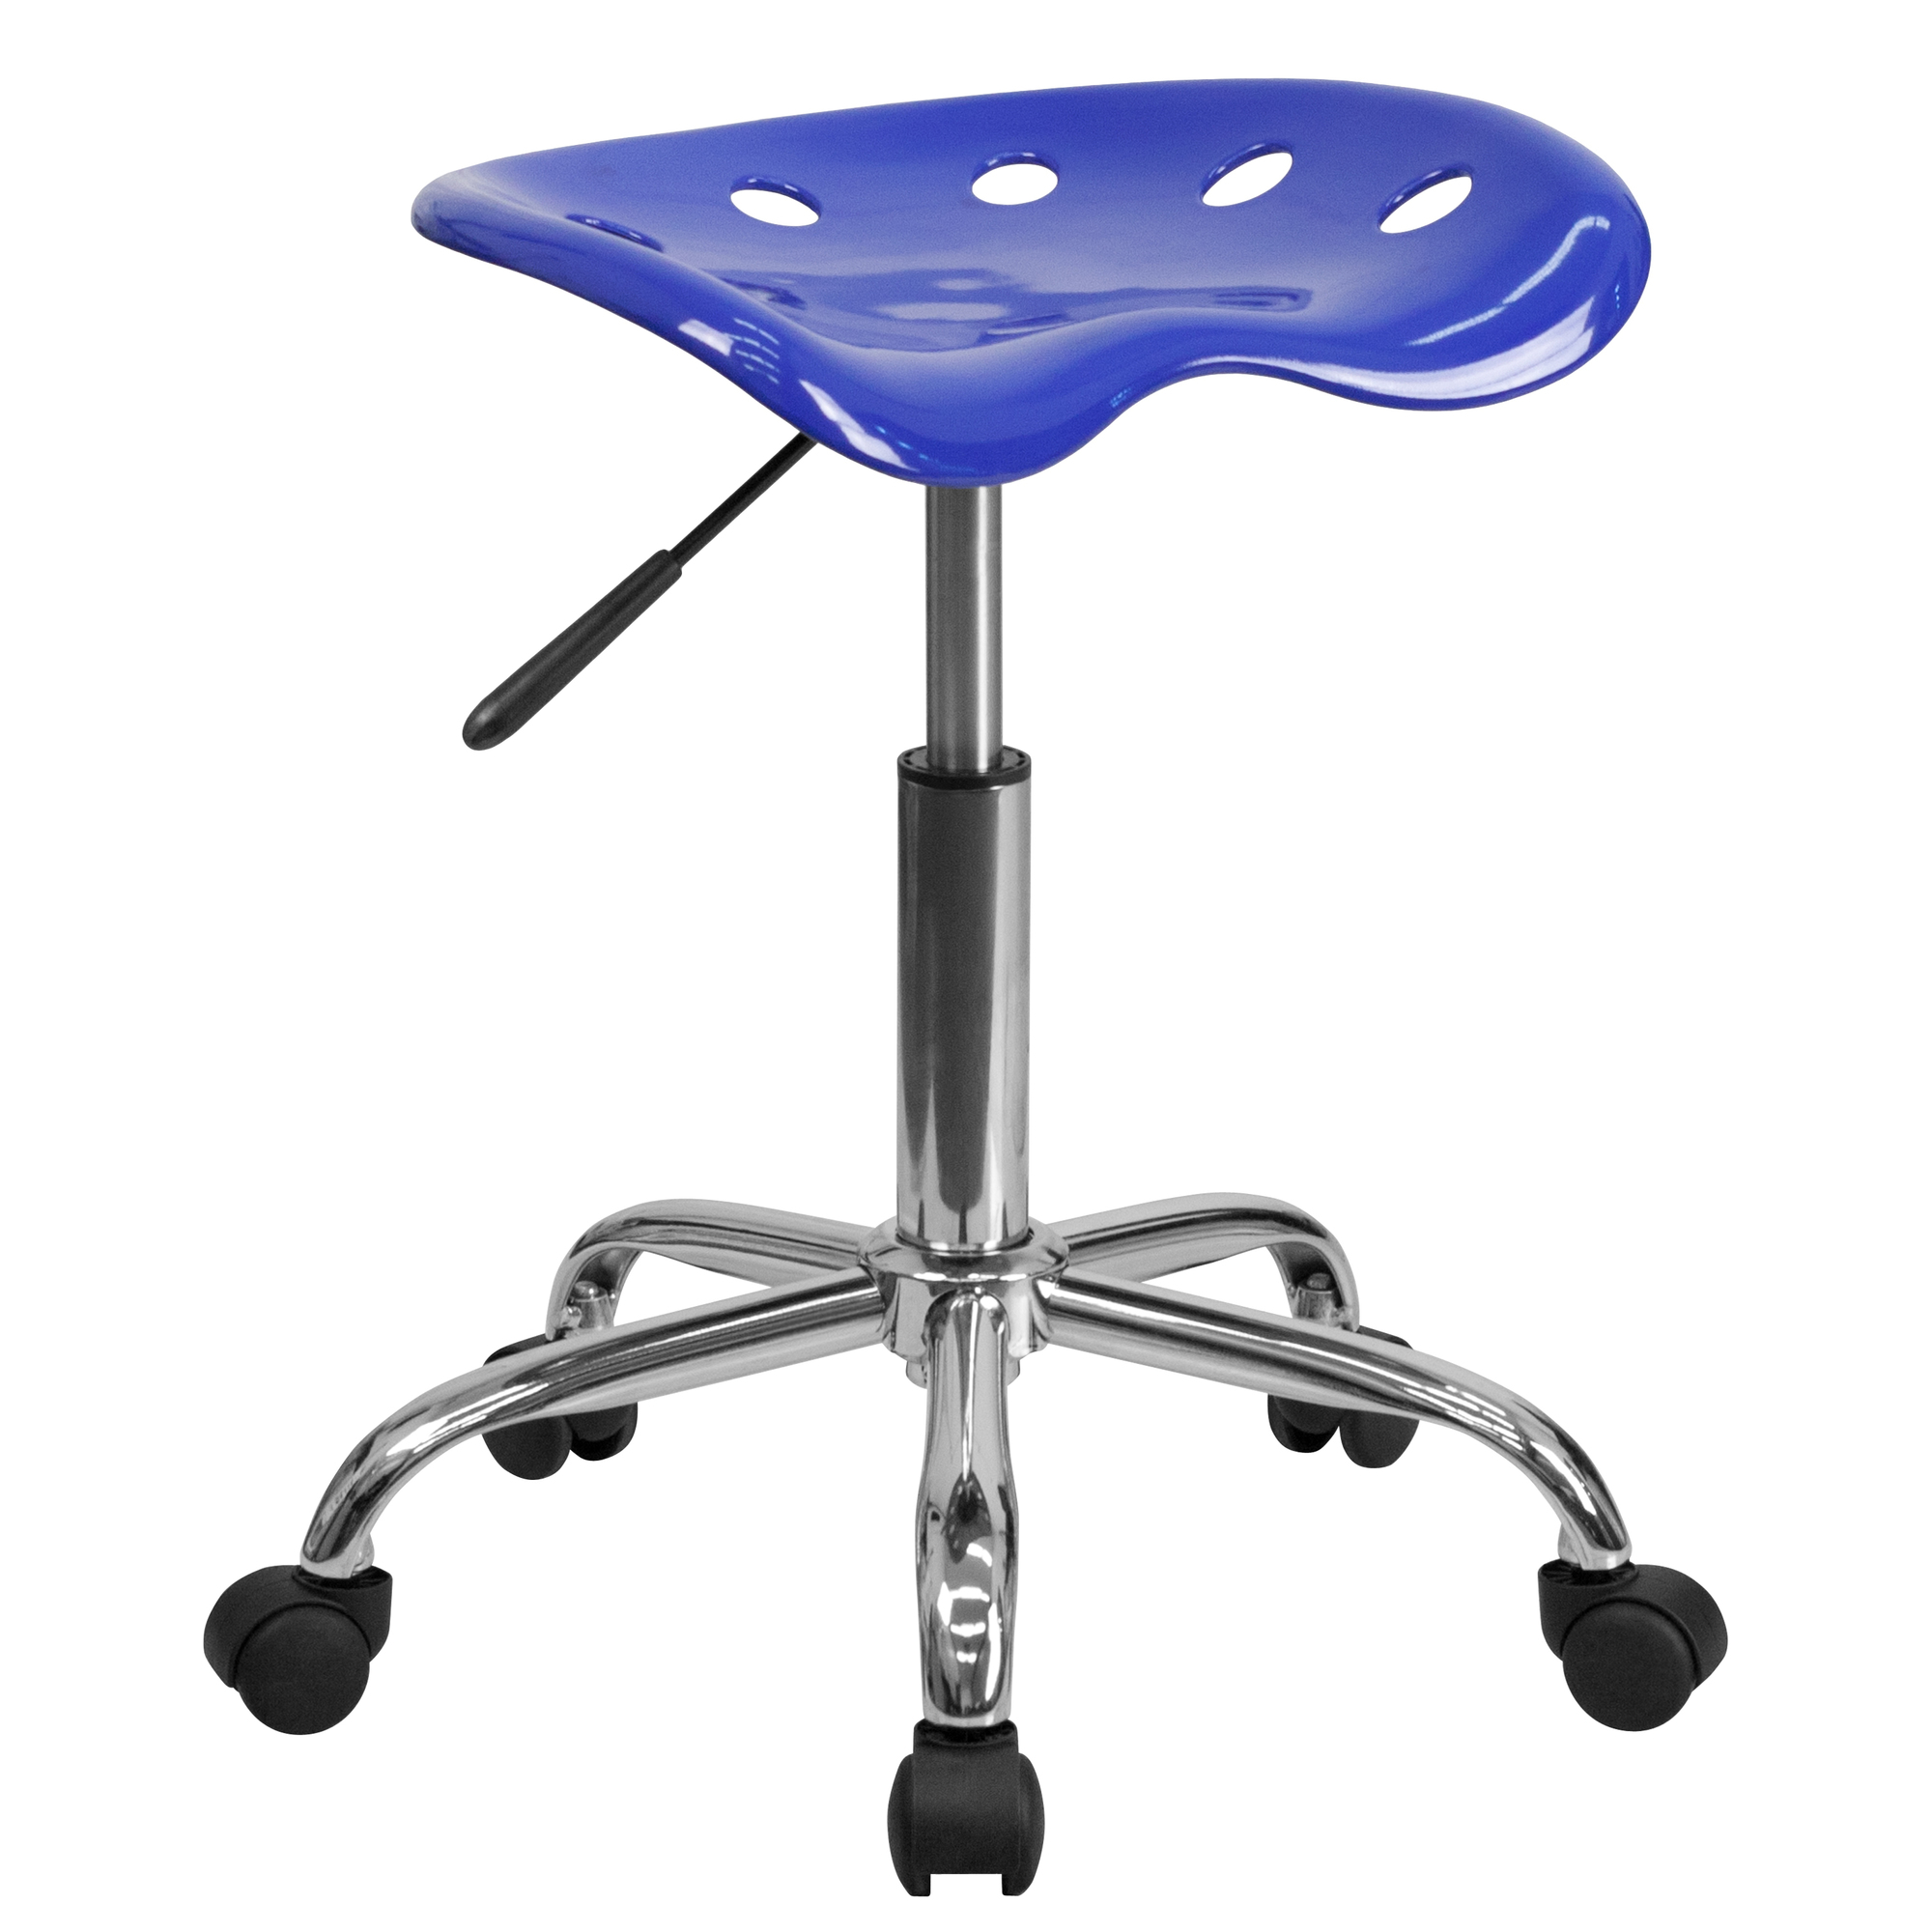 Vibrant Nautical Blue Tractor Seat Chrome Stool, Primary Color Blue, Included (qty.) 1, Model - Flash Furniture LF214ANTCLBLUE